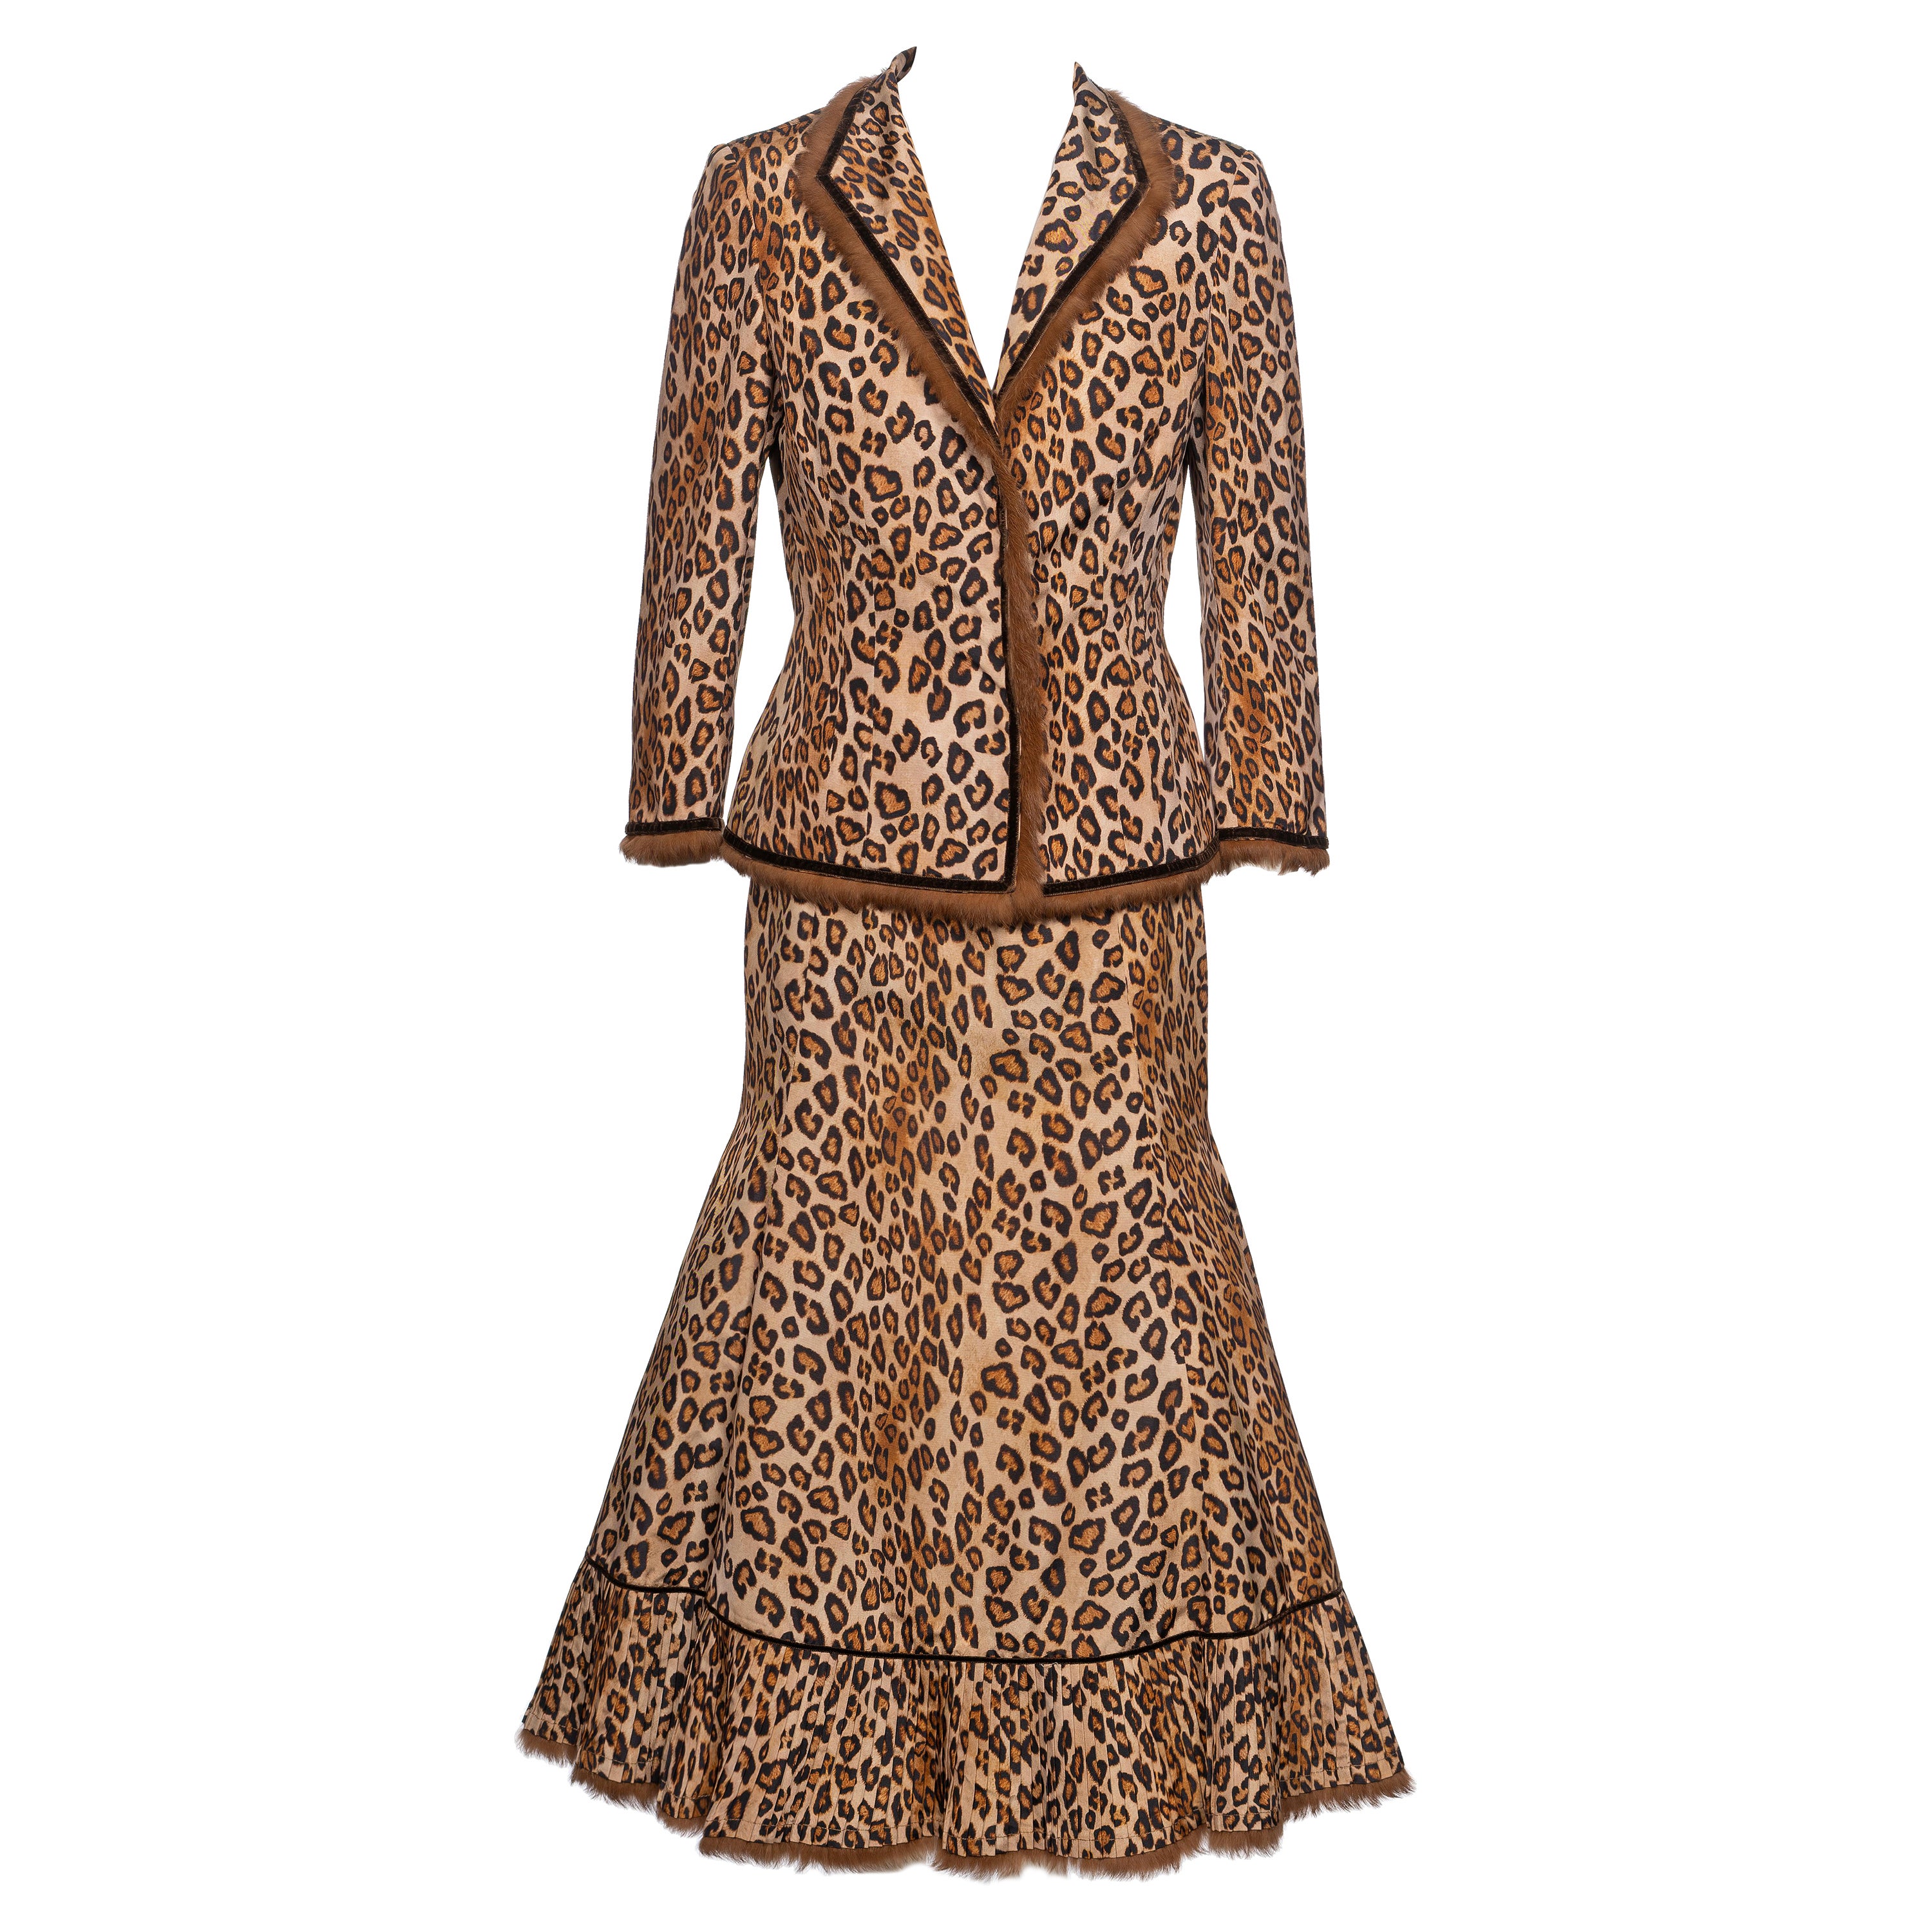 Alexander McQueen Leopard Print Silk and Fur Jacket and Skirt Suit, FW 2005 For Sale